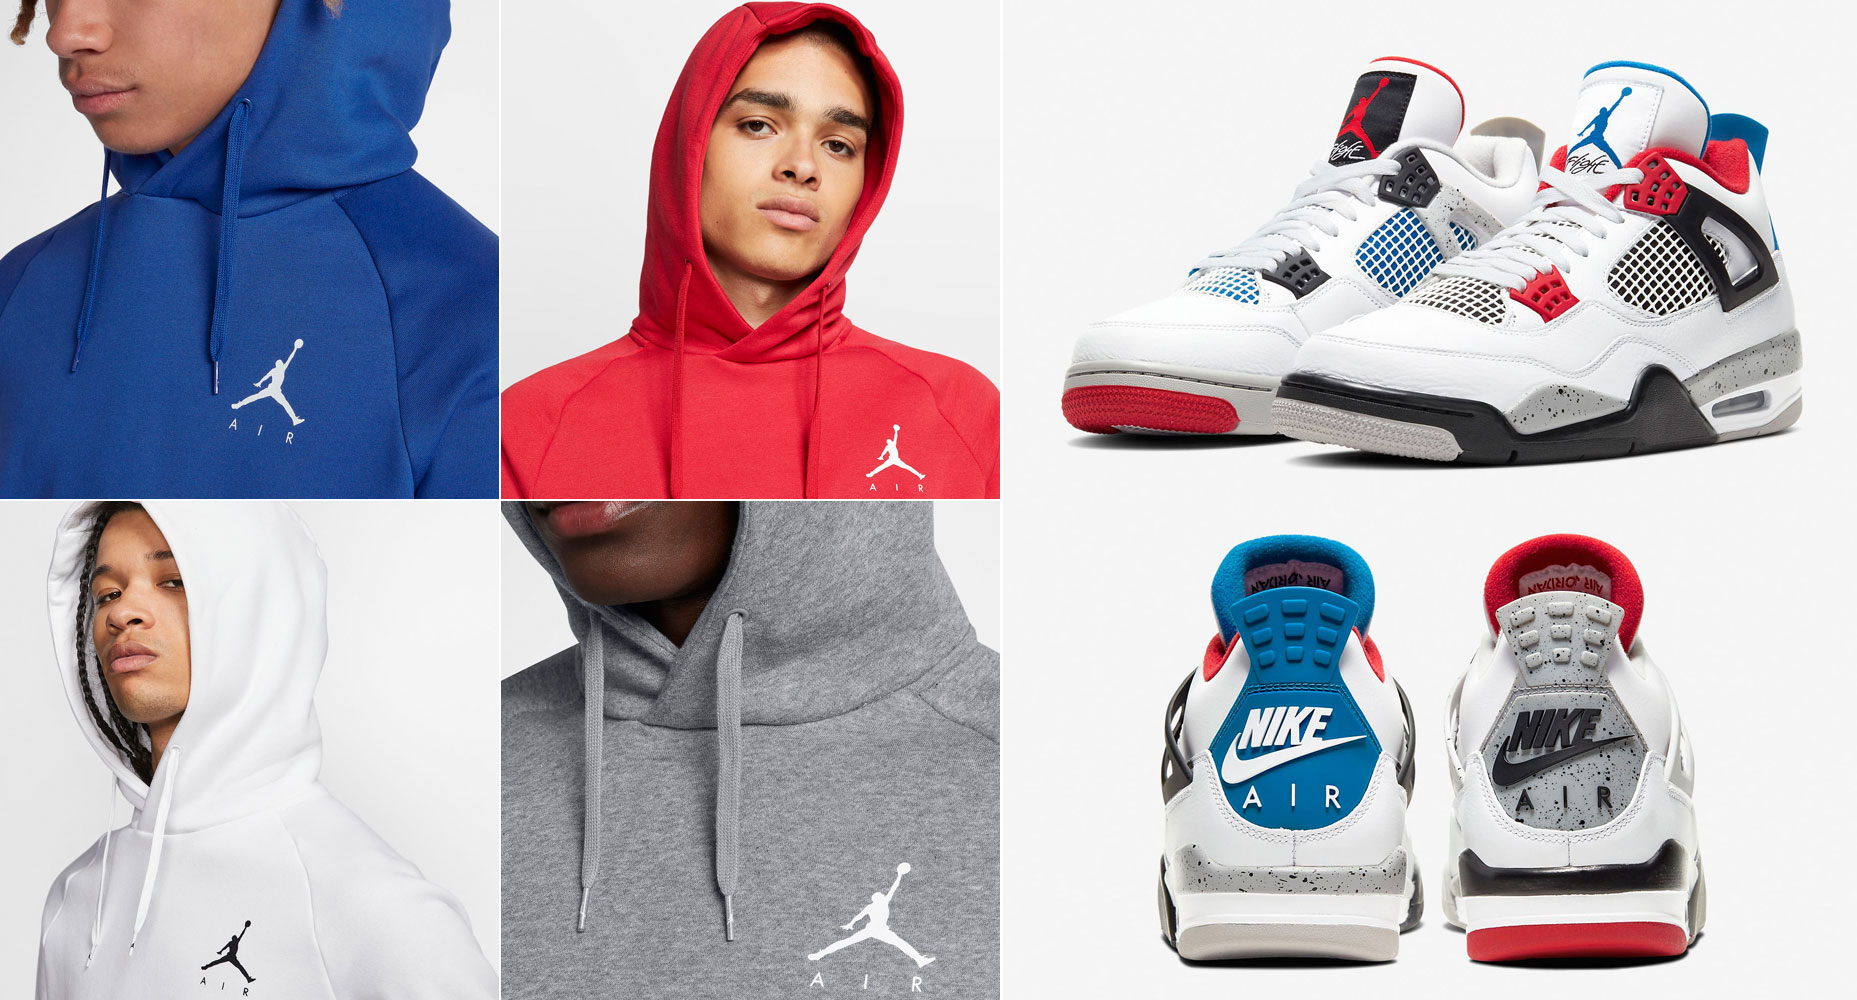 hoodies-to-match-air-jordan-4-what-the-shoes